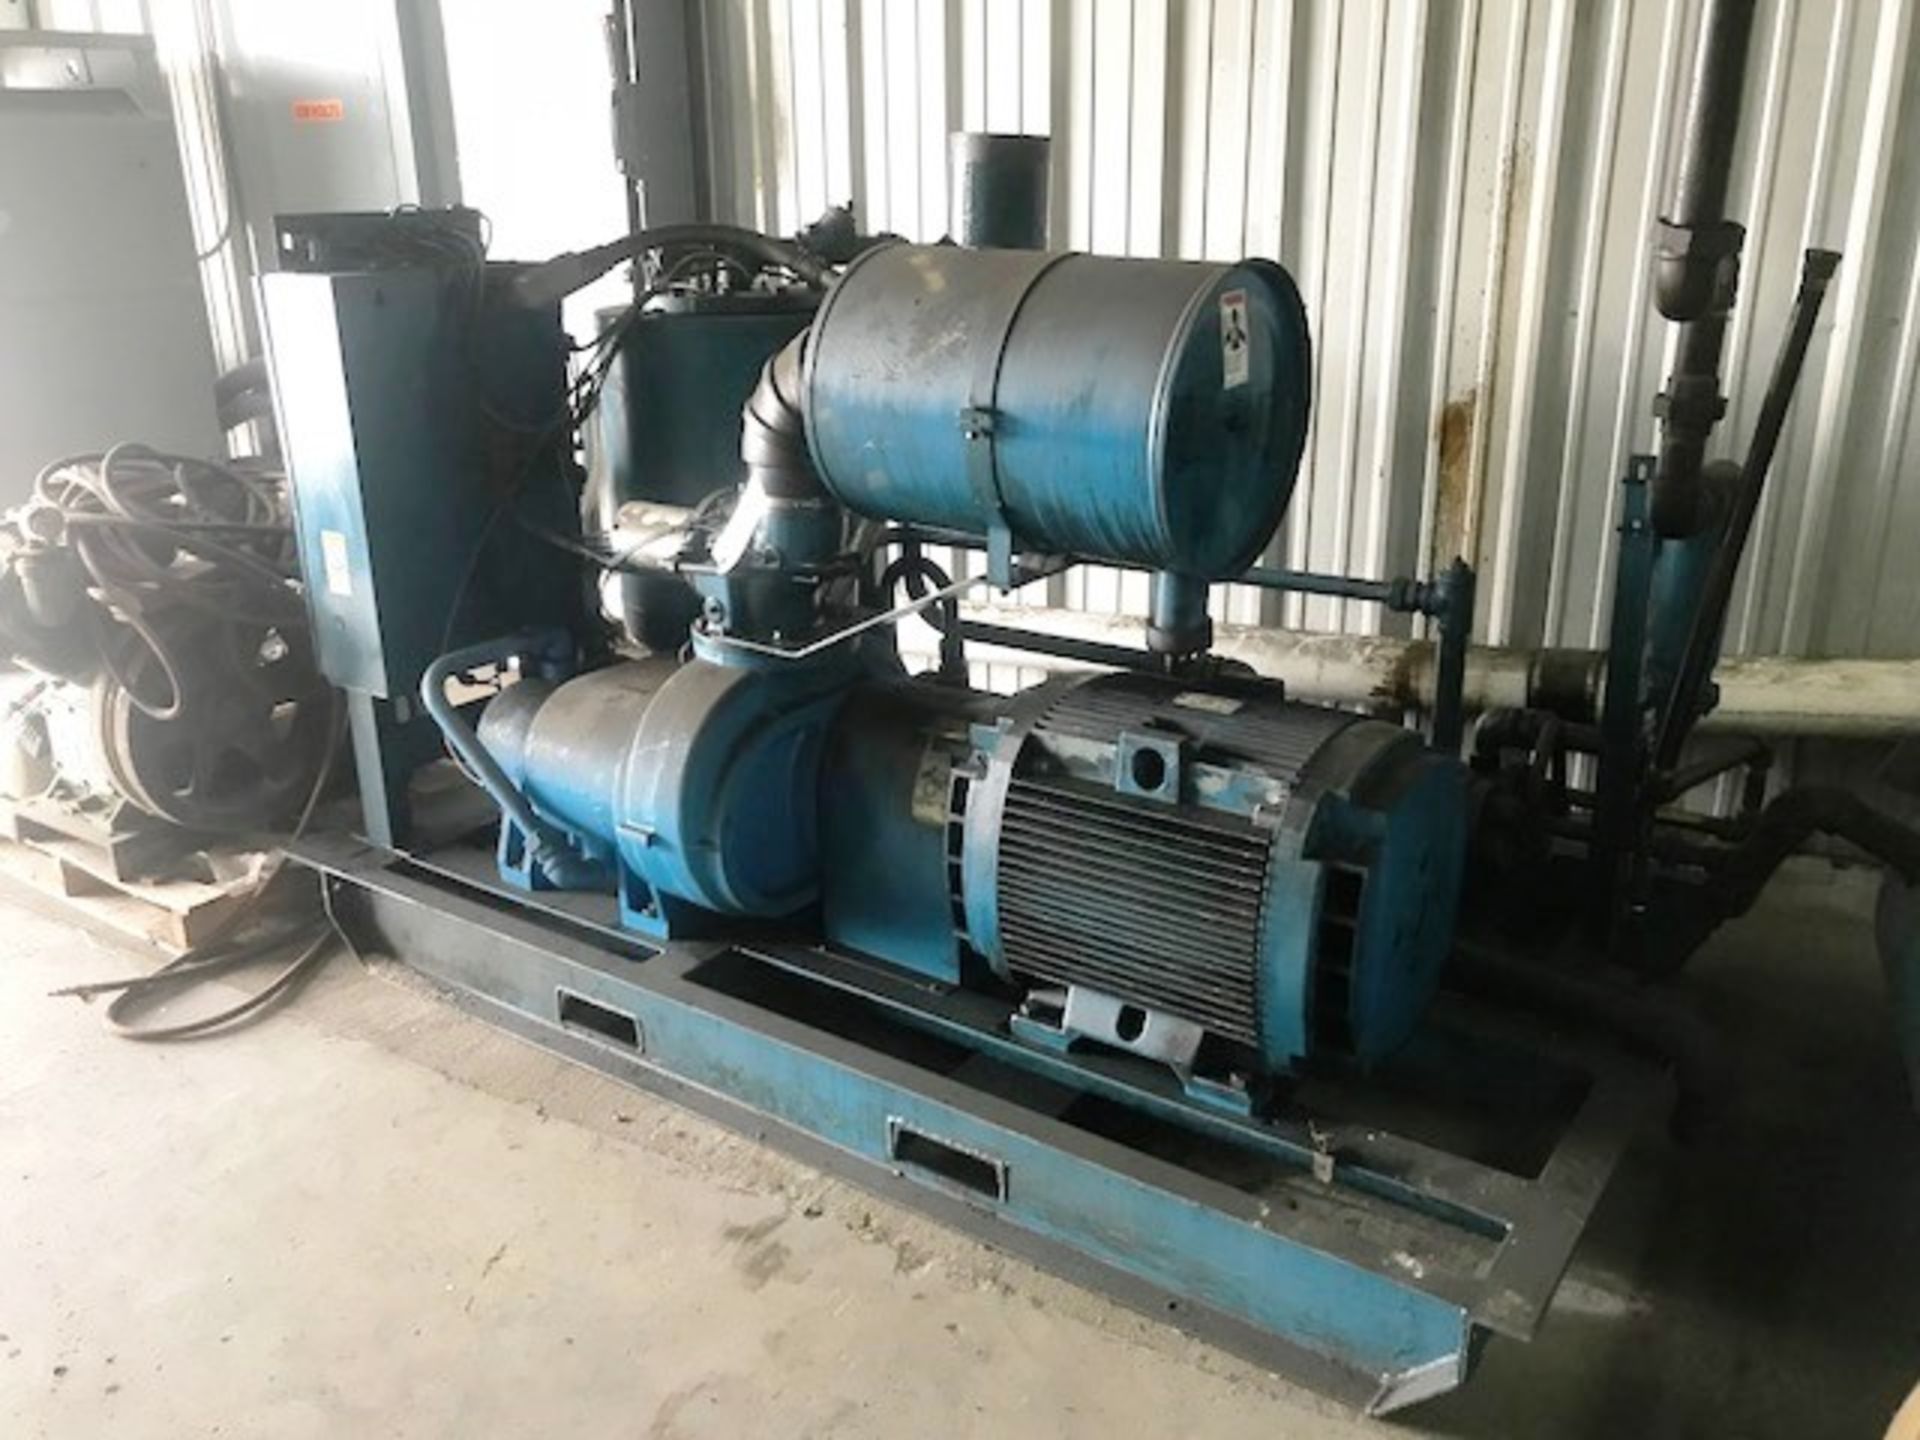 Qunicy Rotary Screw Skid Mounted 100 HP Air Compressor with Approx 40513 Hours